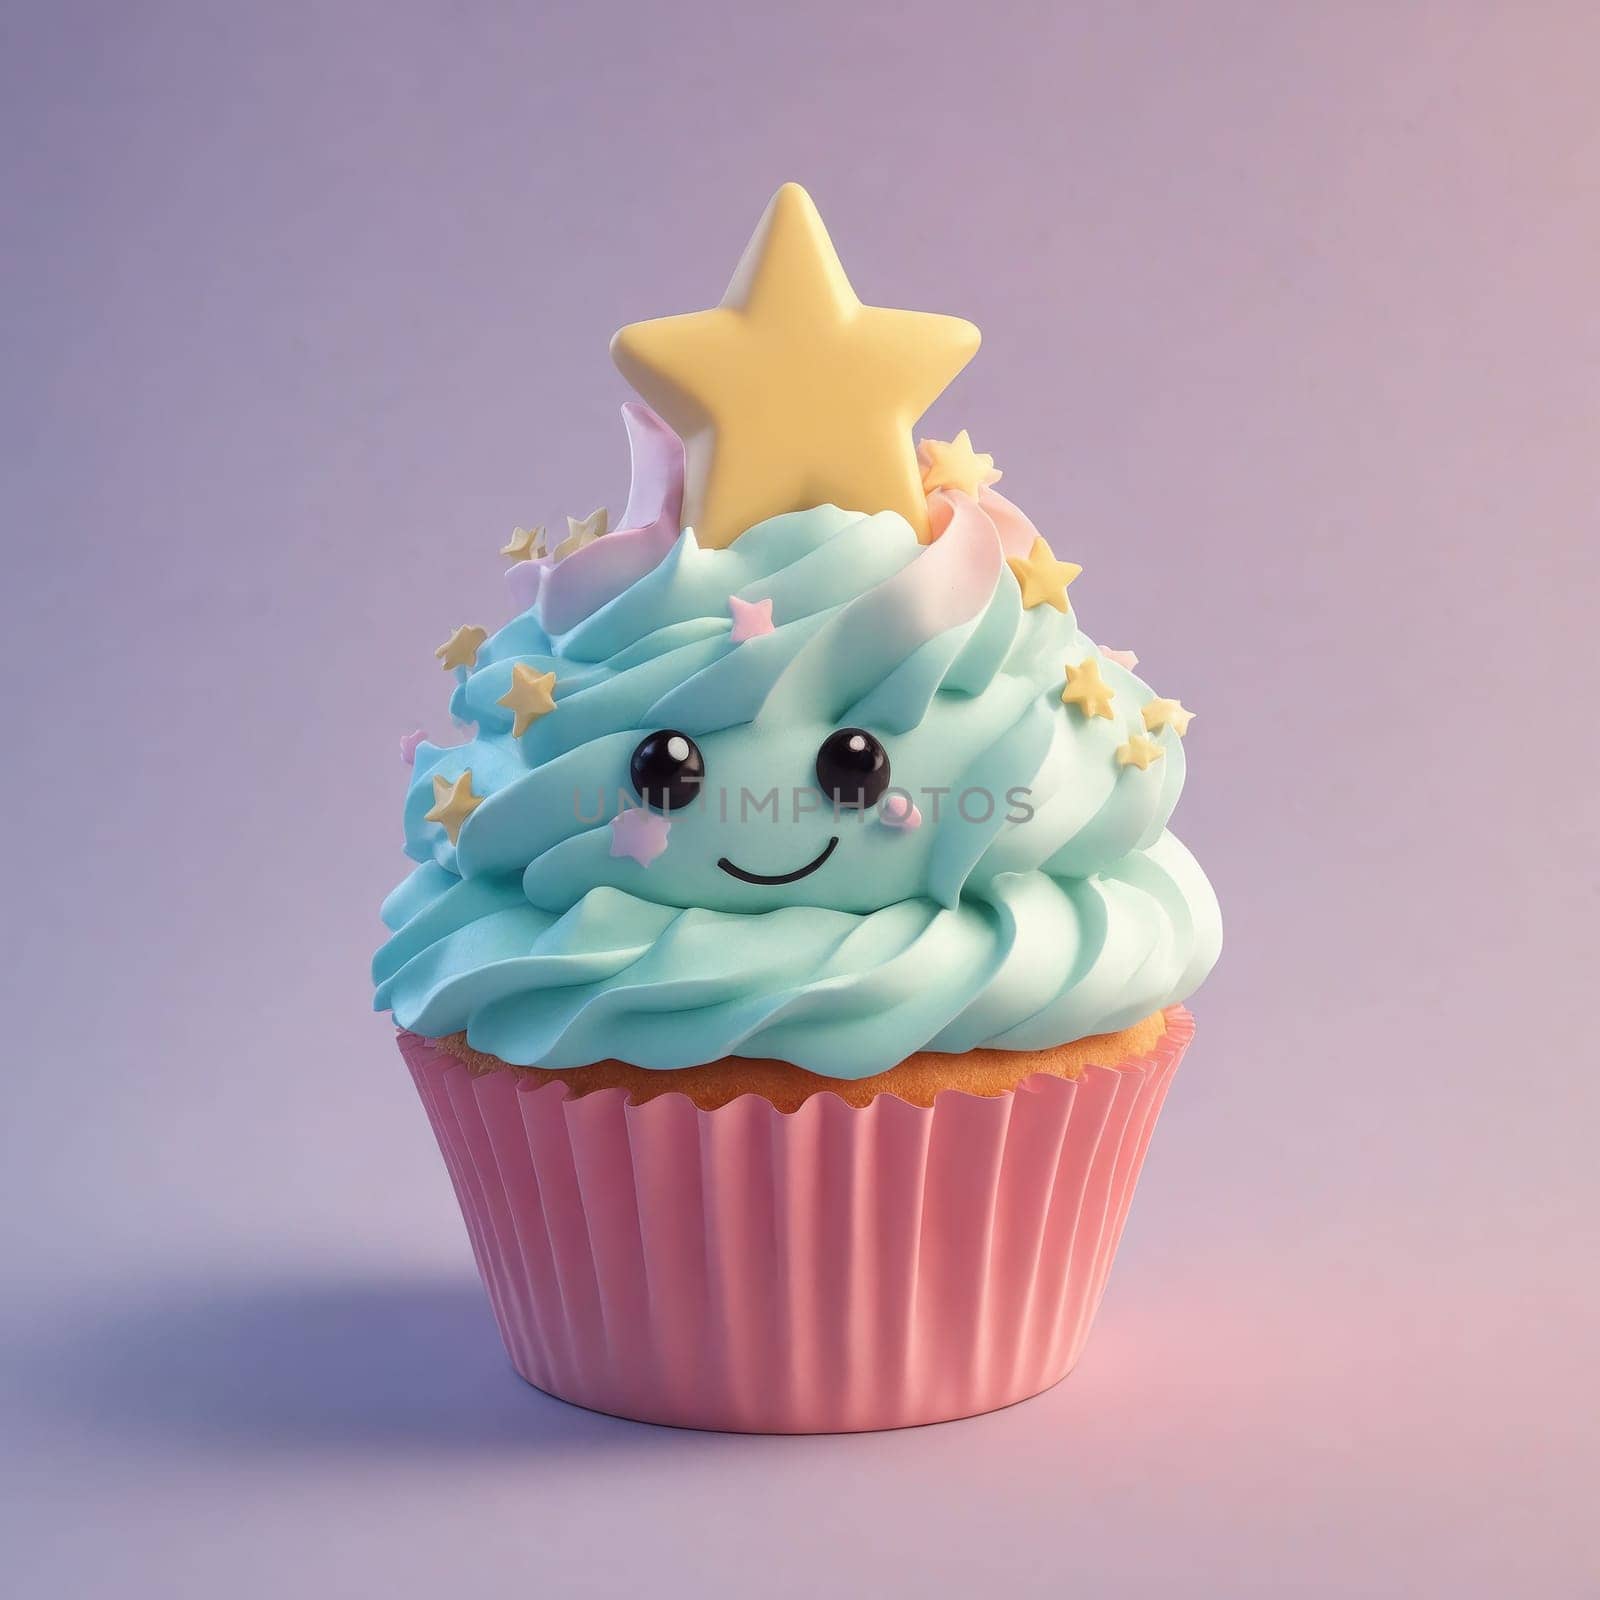 A cute cartoon cupcake smiles with a swirl of blue and pink icing, crowned with a charming heart.